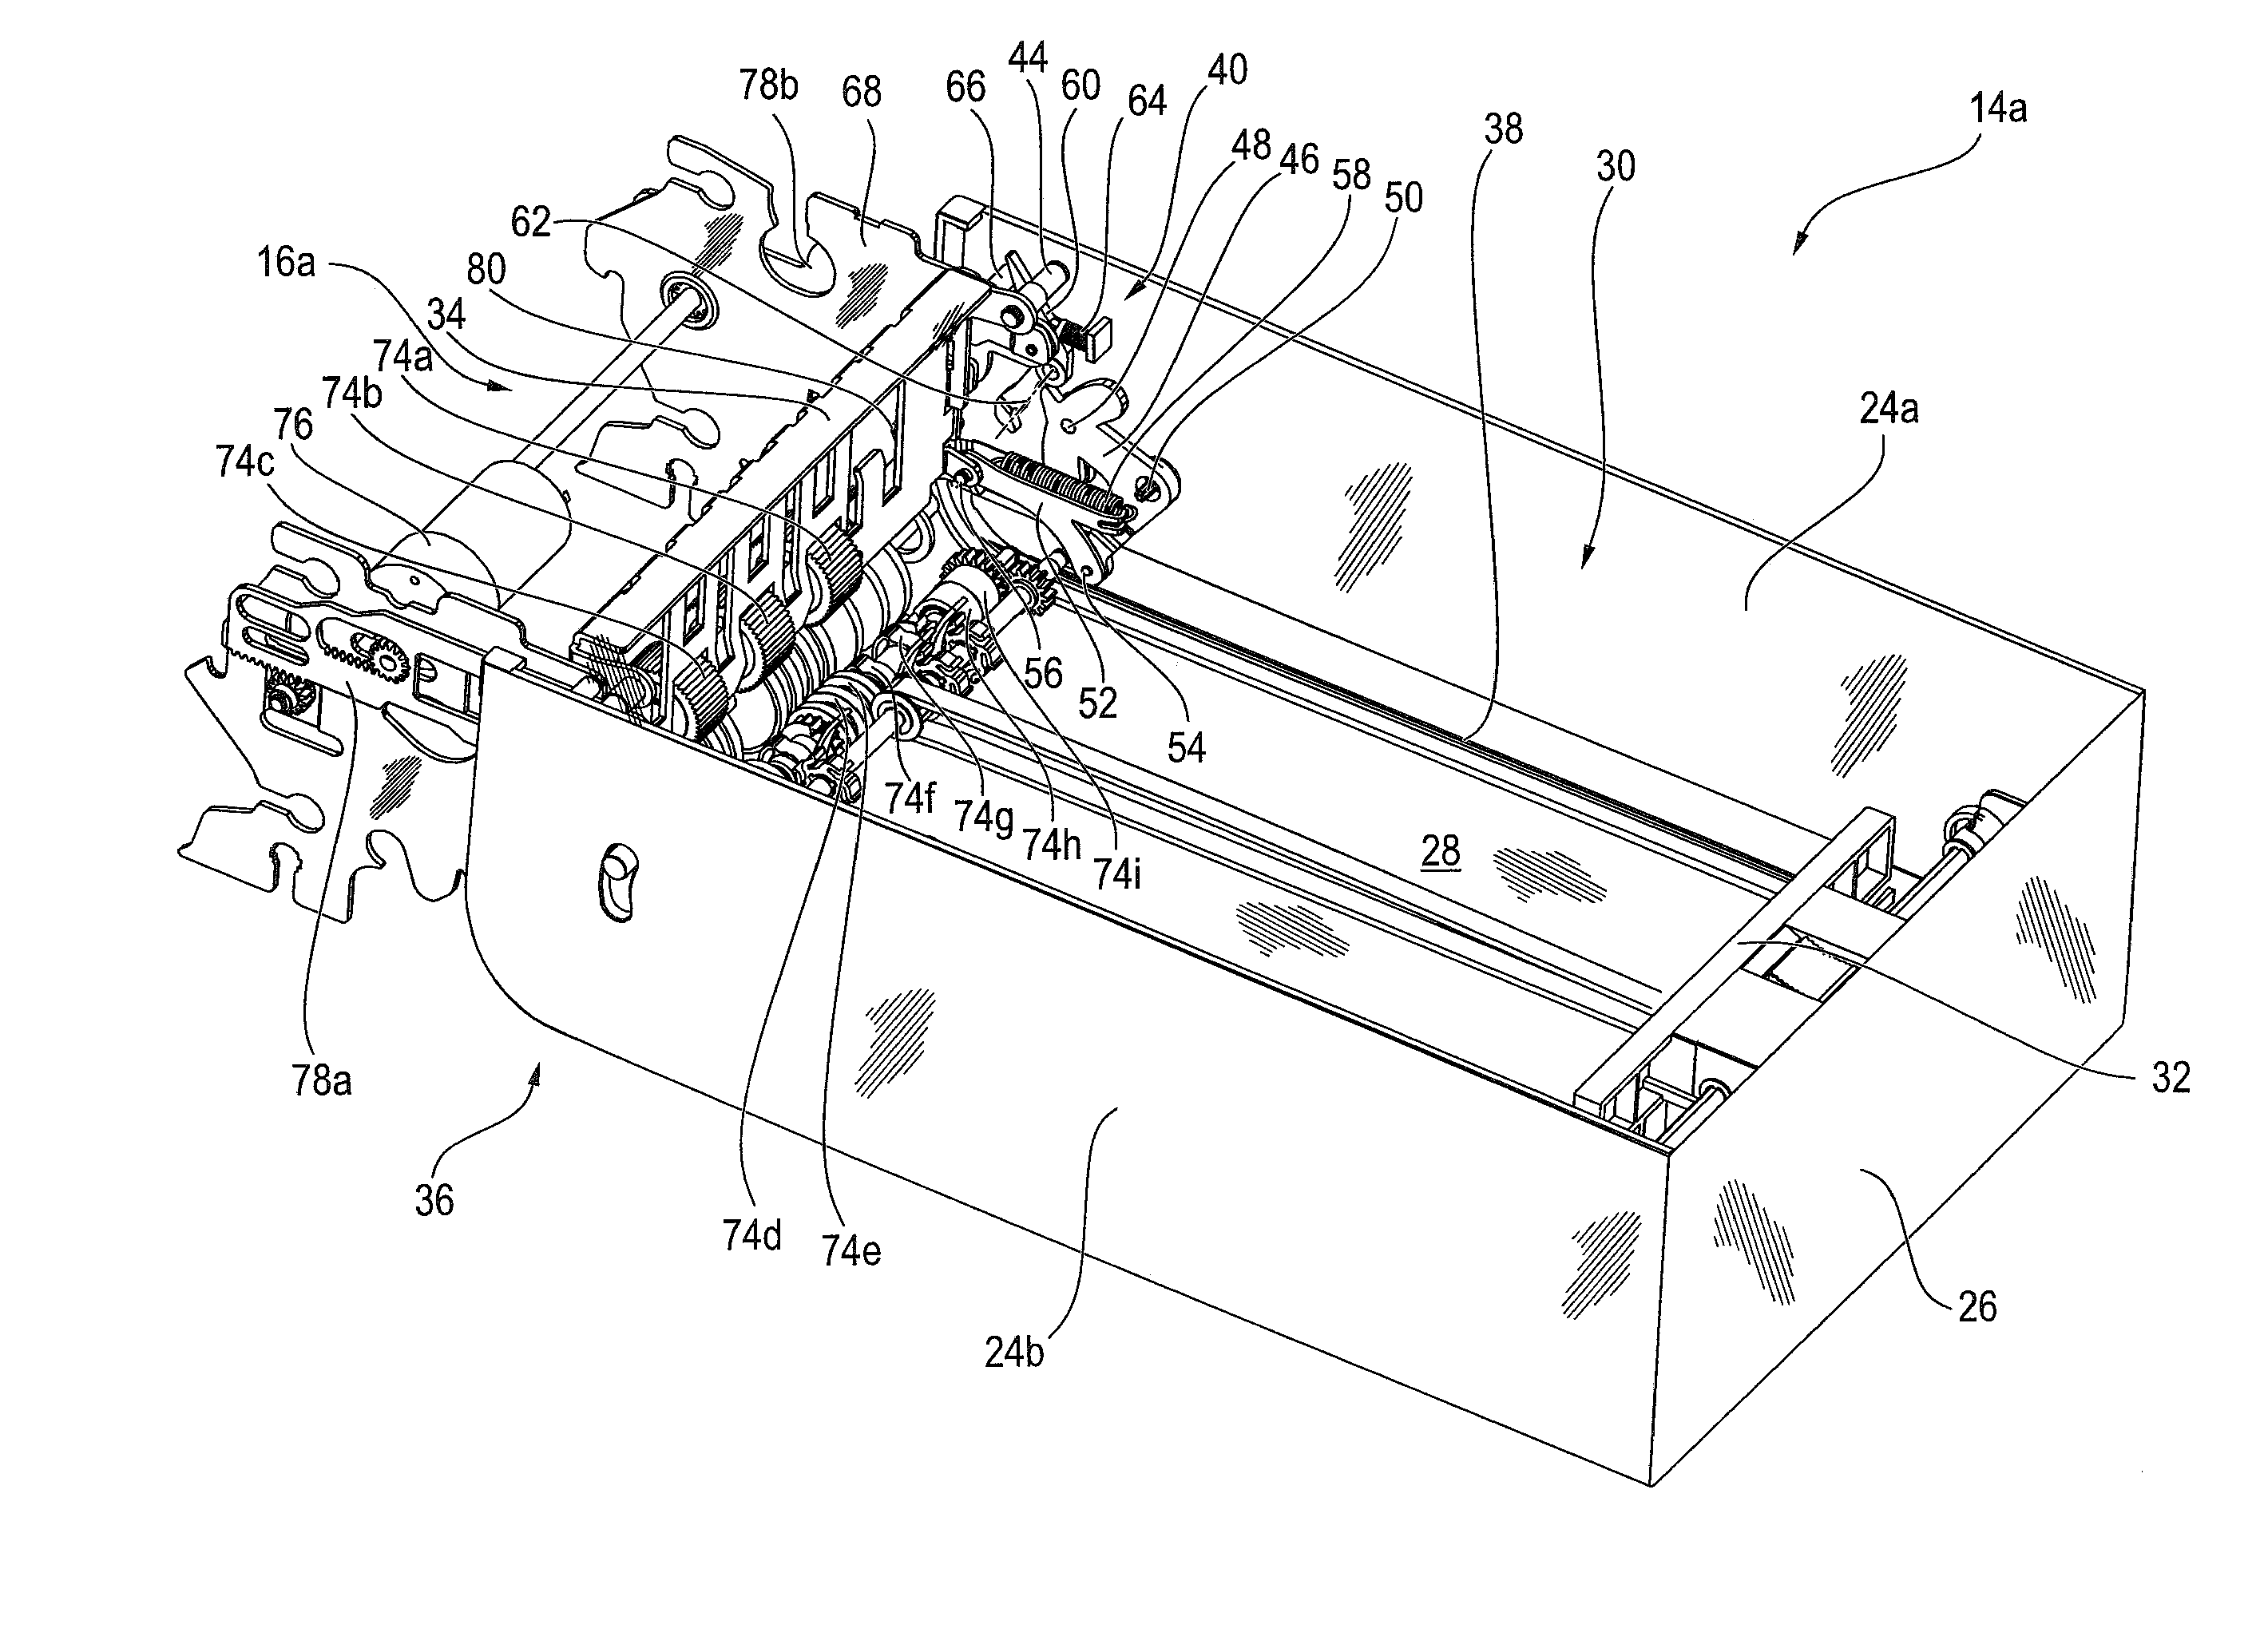 Device for handling banknotes